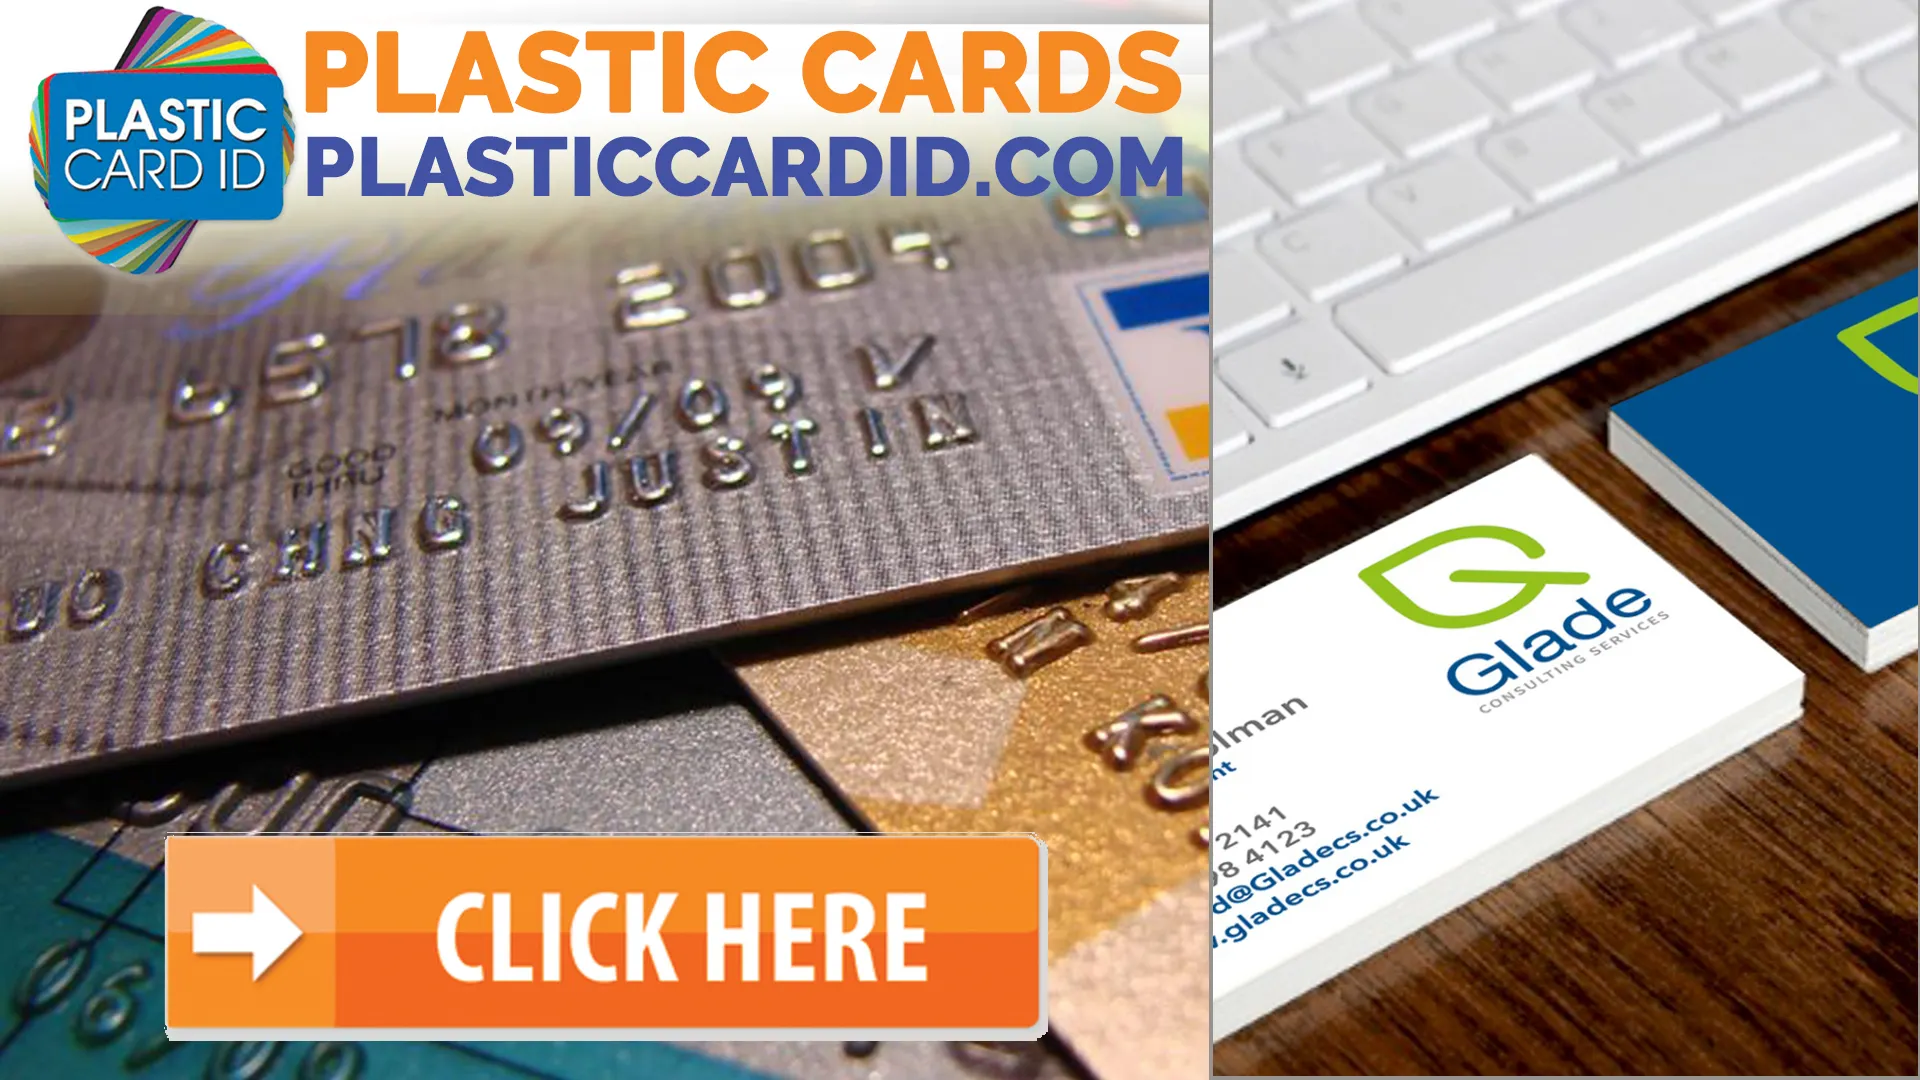 Maximizing Visibility with Co-Branded Partnership Cards